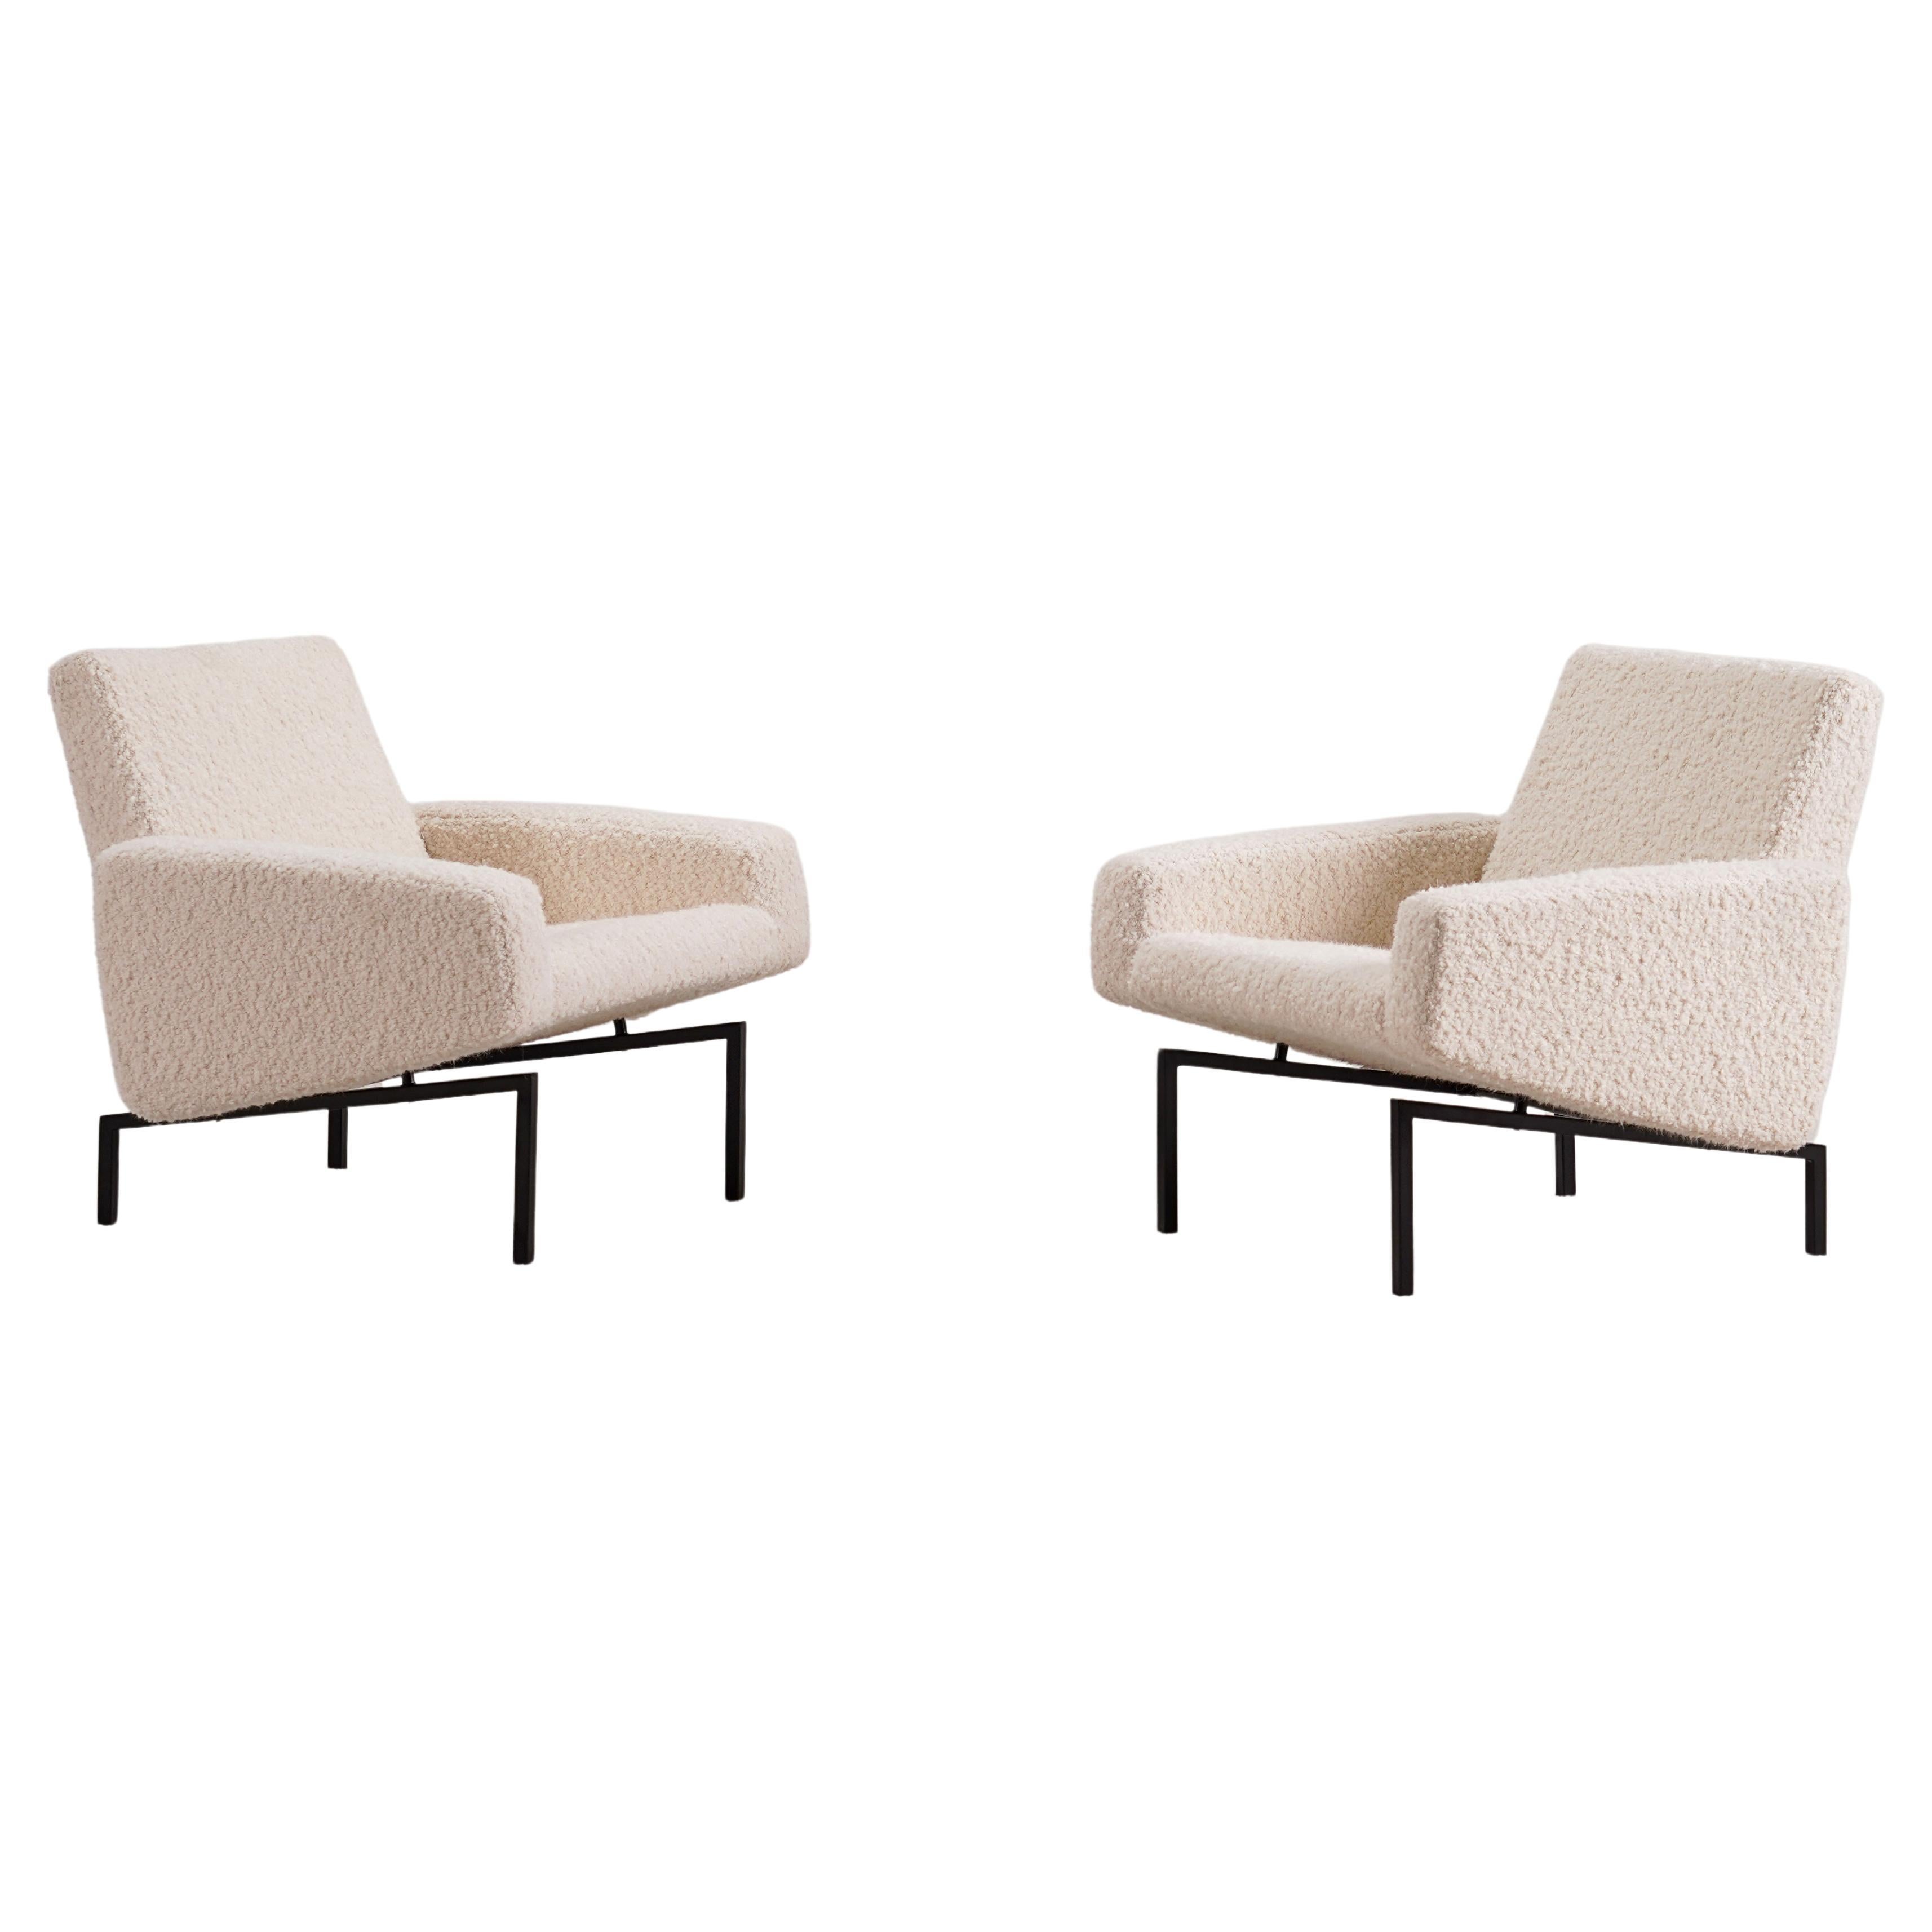 Joseph-André Motte, Pair of "Tempo" Armchairs for Steiner, France, 1950 For Sale